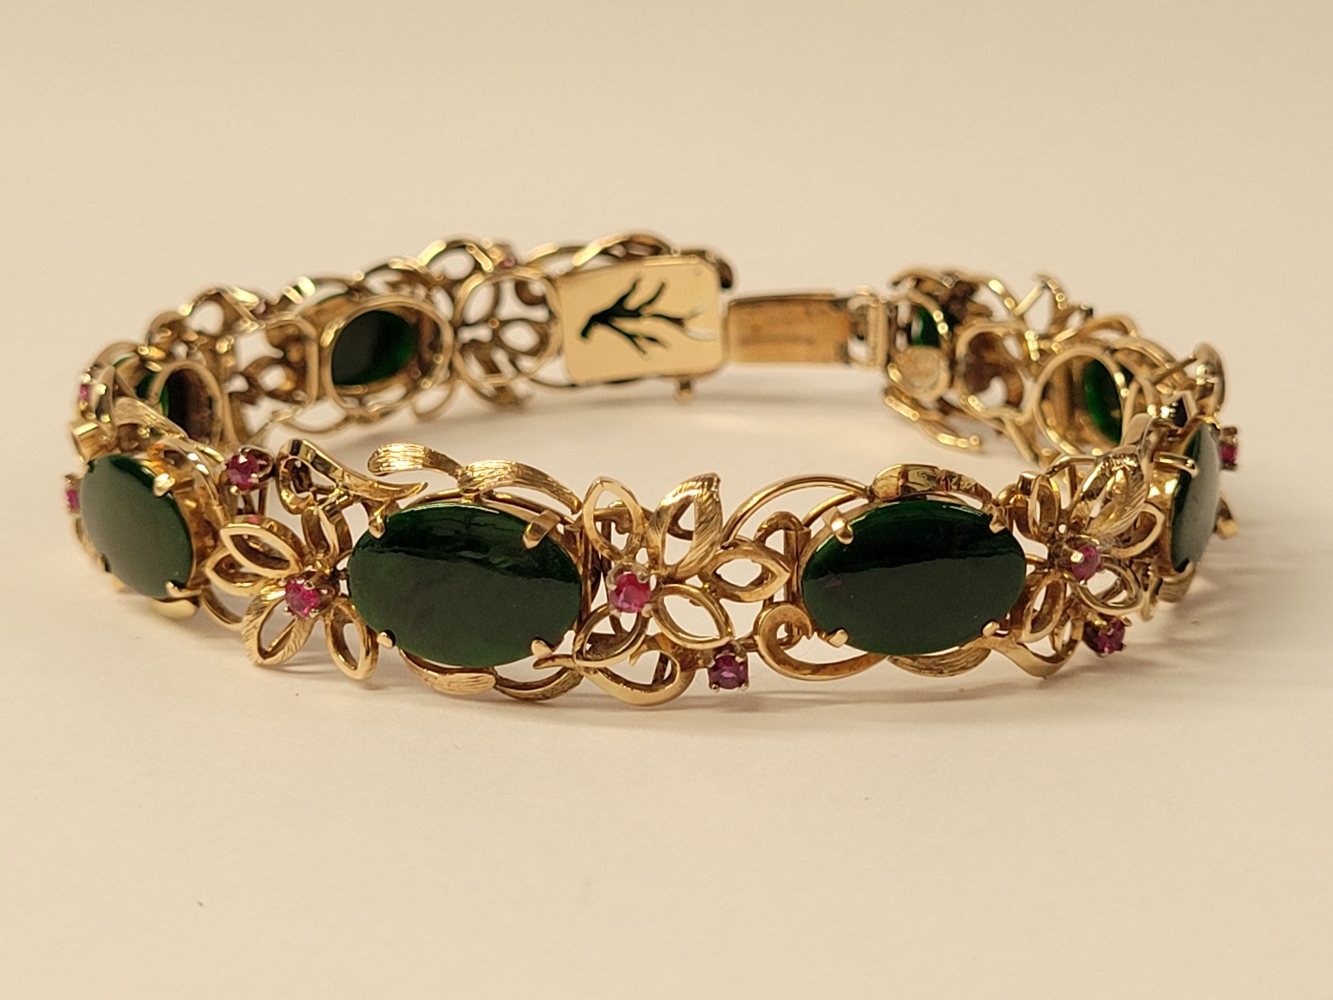 A 14CT YELLOW GOLD JADE AND RUBY BRACELET, 19cm long. Floral design setting. Marked 585 14K.